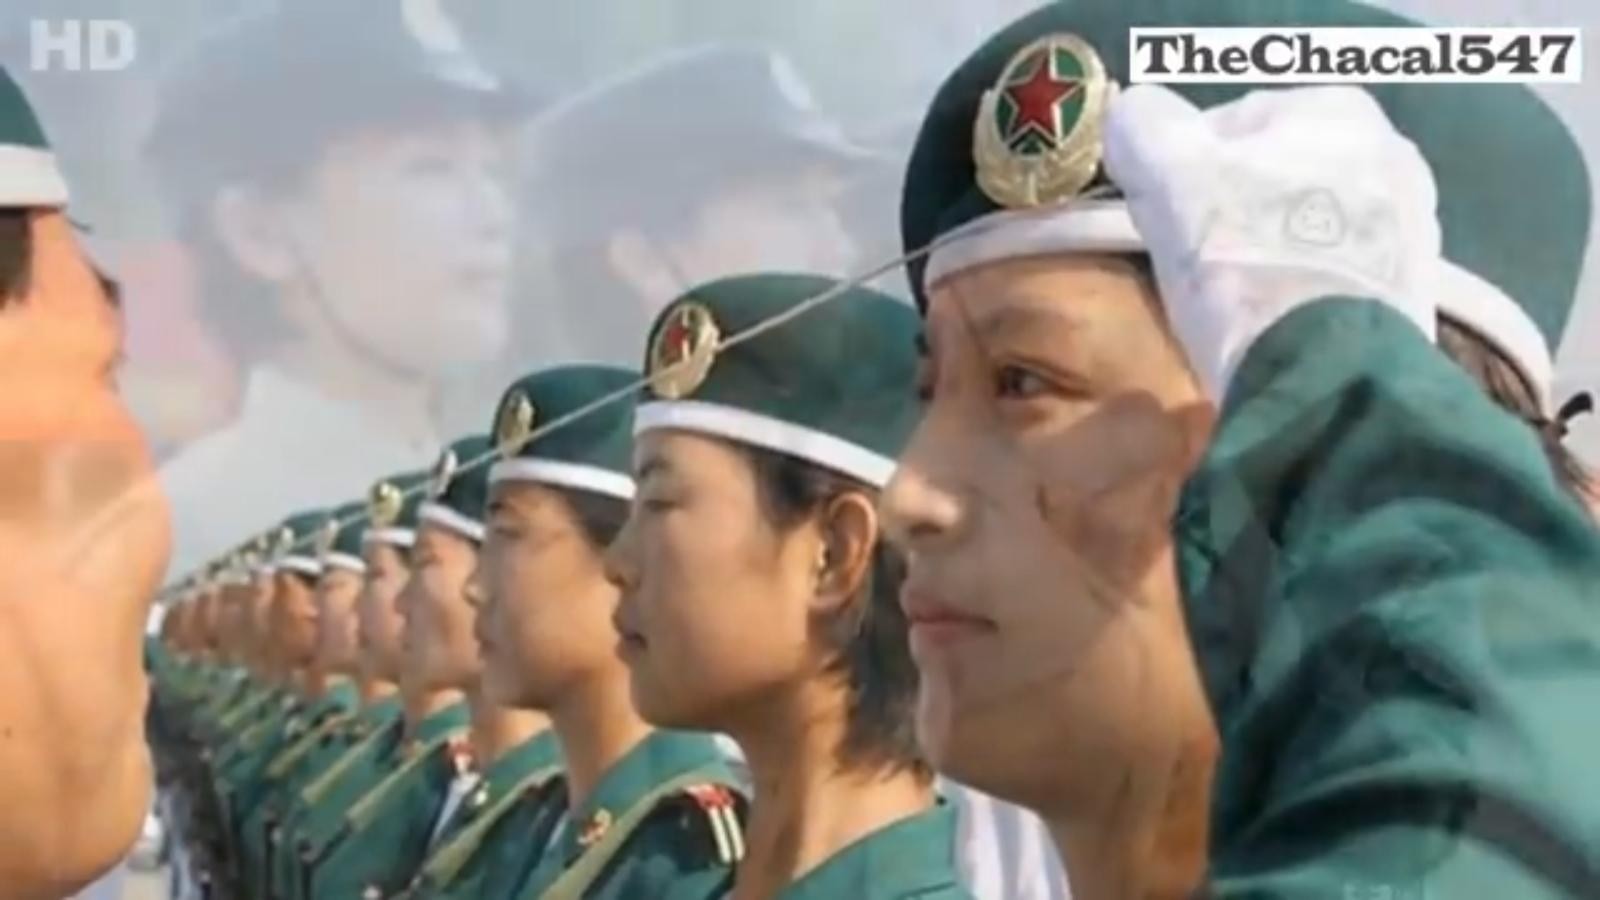 [Image] Chinese army marching said to be the most beautiful in the world, training wwwwwww is too dangerous